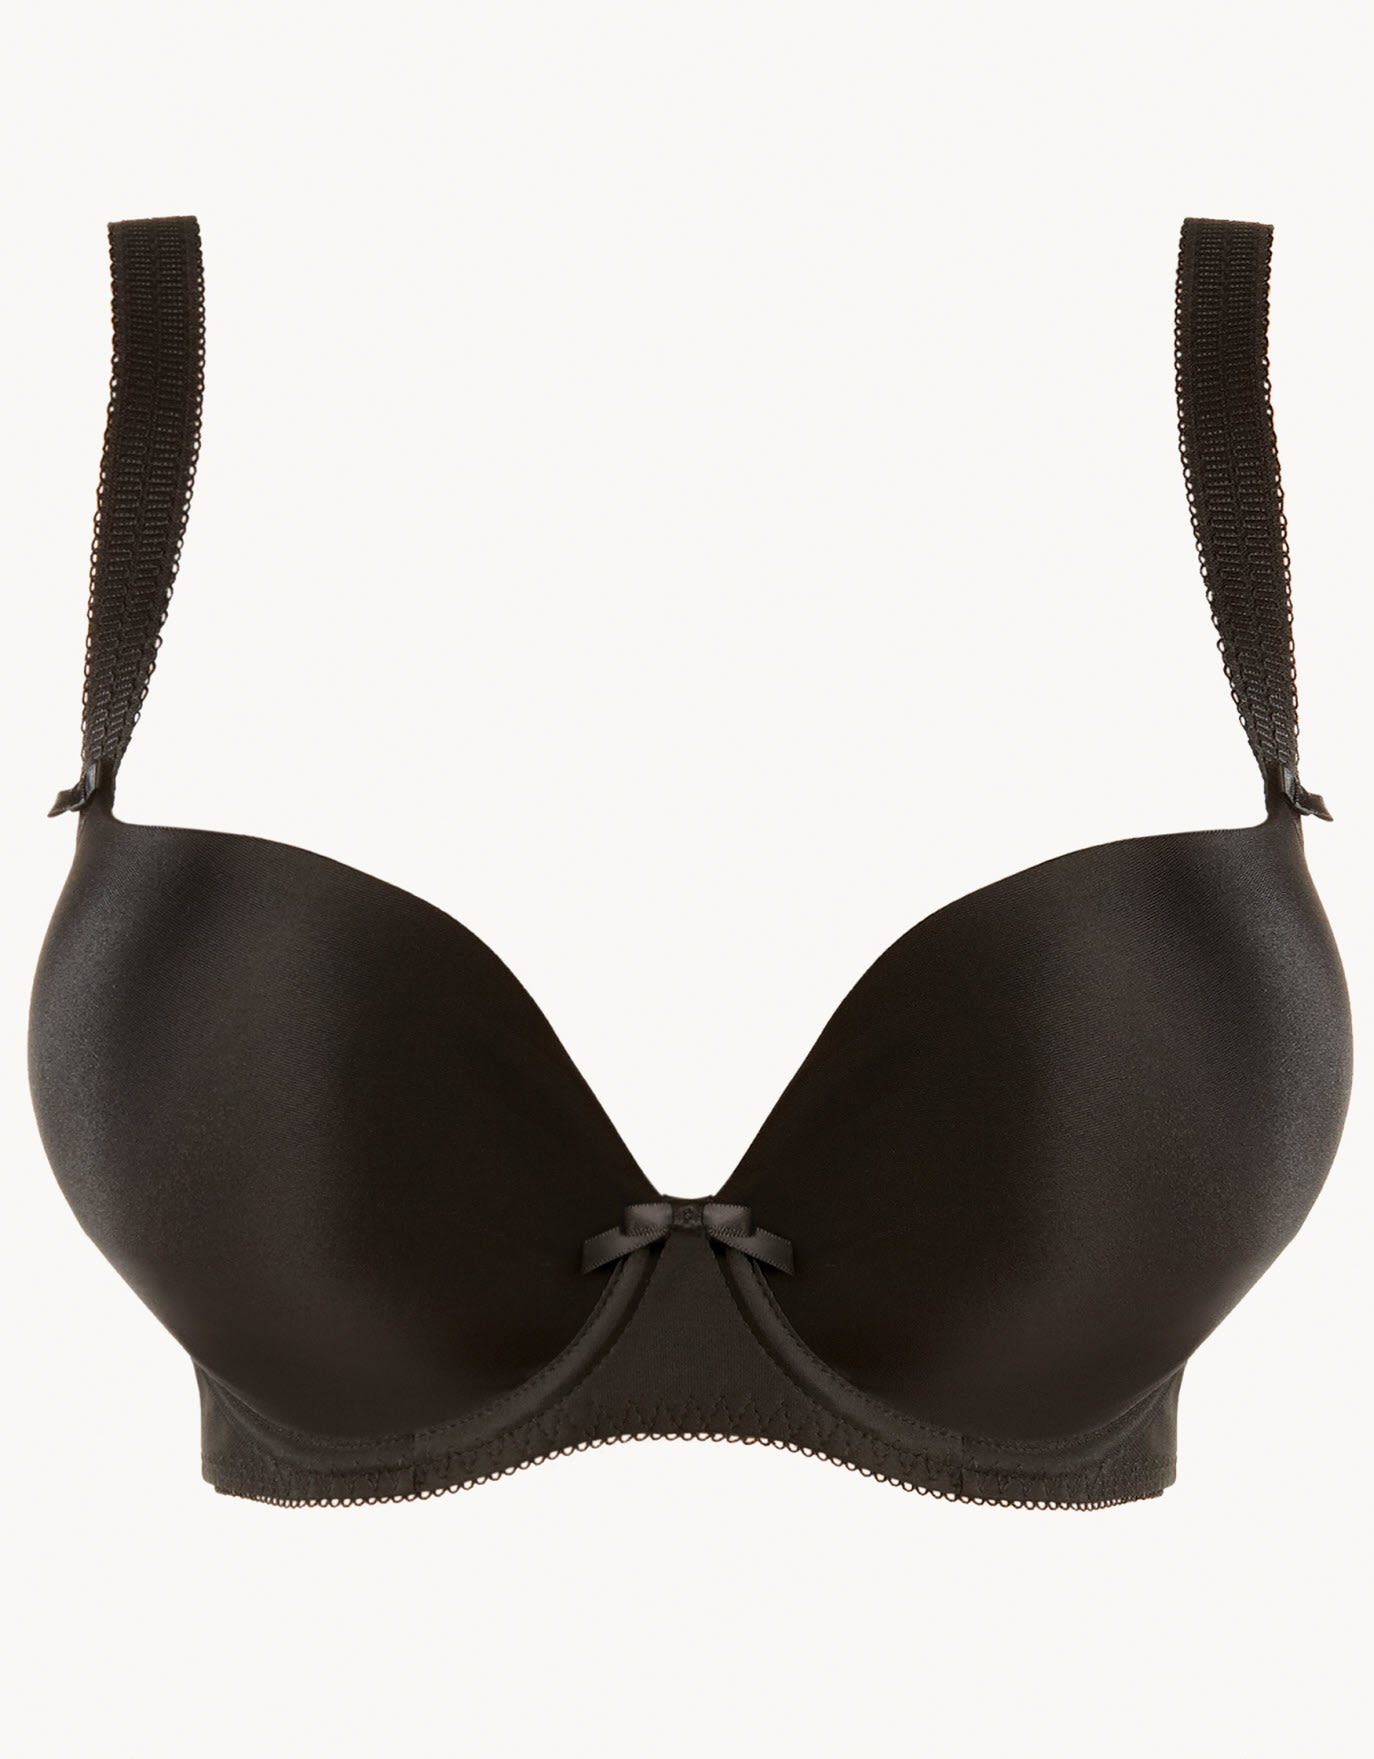 Recs suggested seem wrong. This bra feels like it fits good. 28G - Freya »  Deco Delight Moulded Plunge Bra (1561)